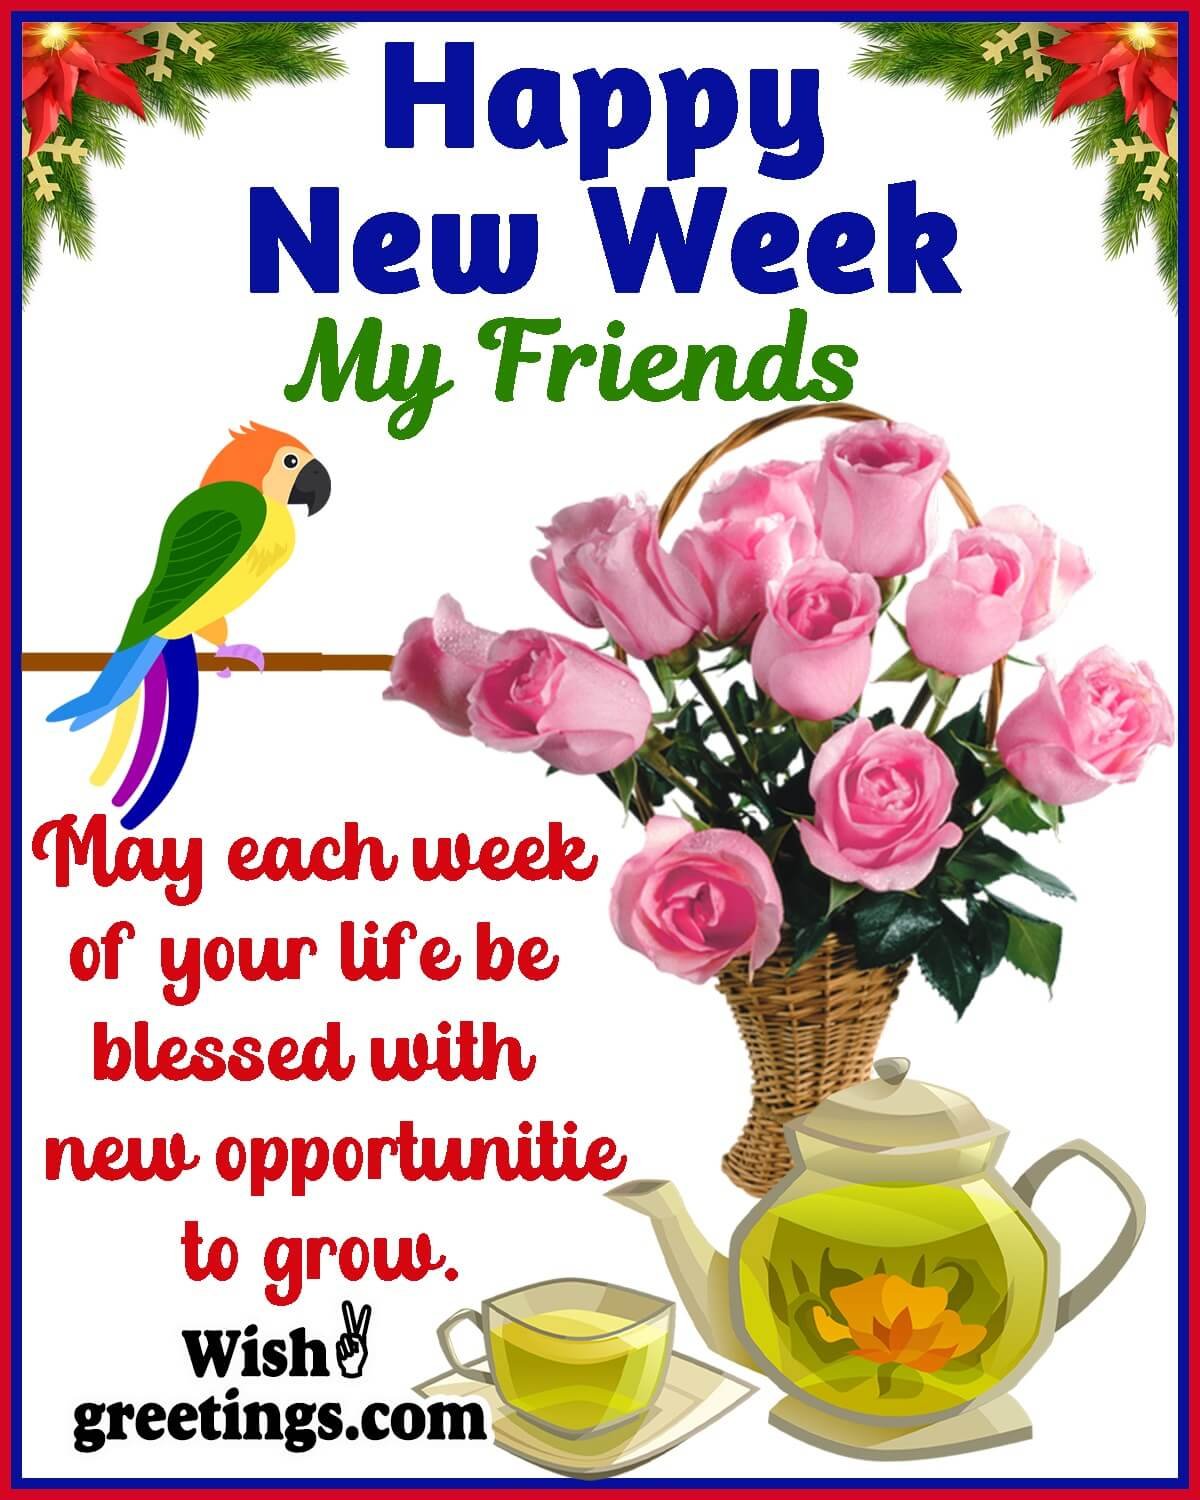 have a blessed week my friend